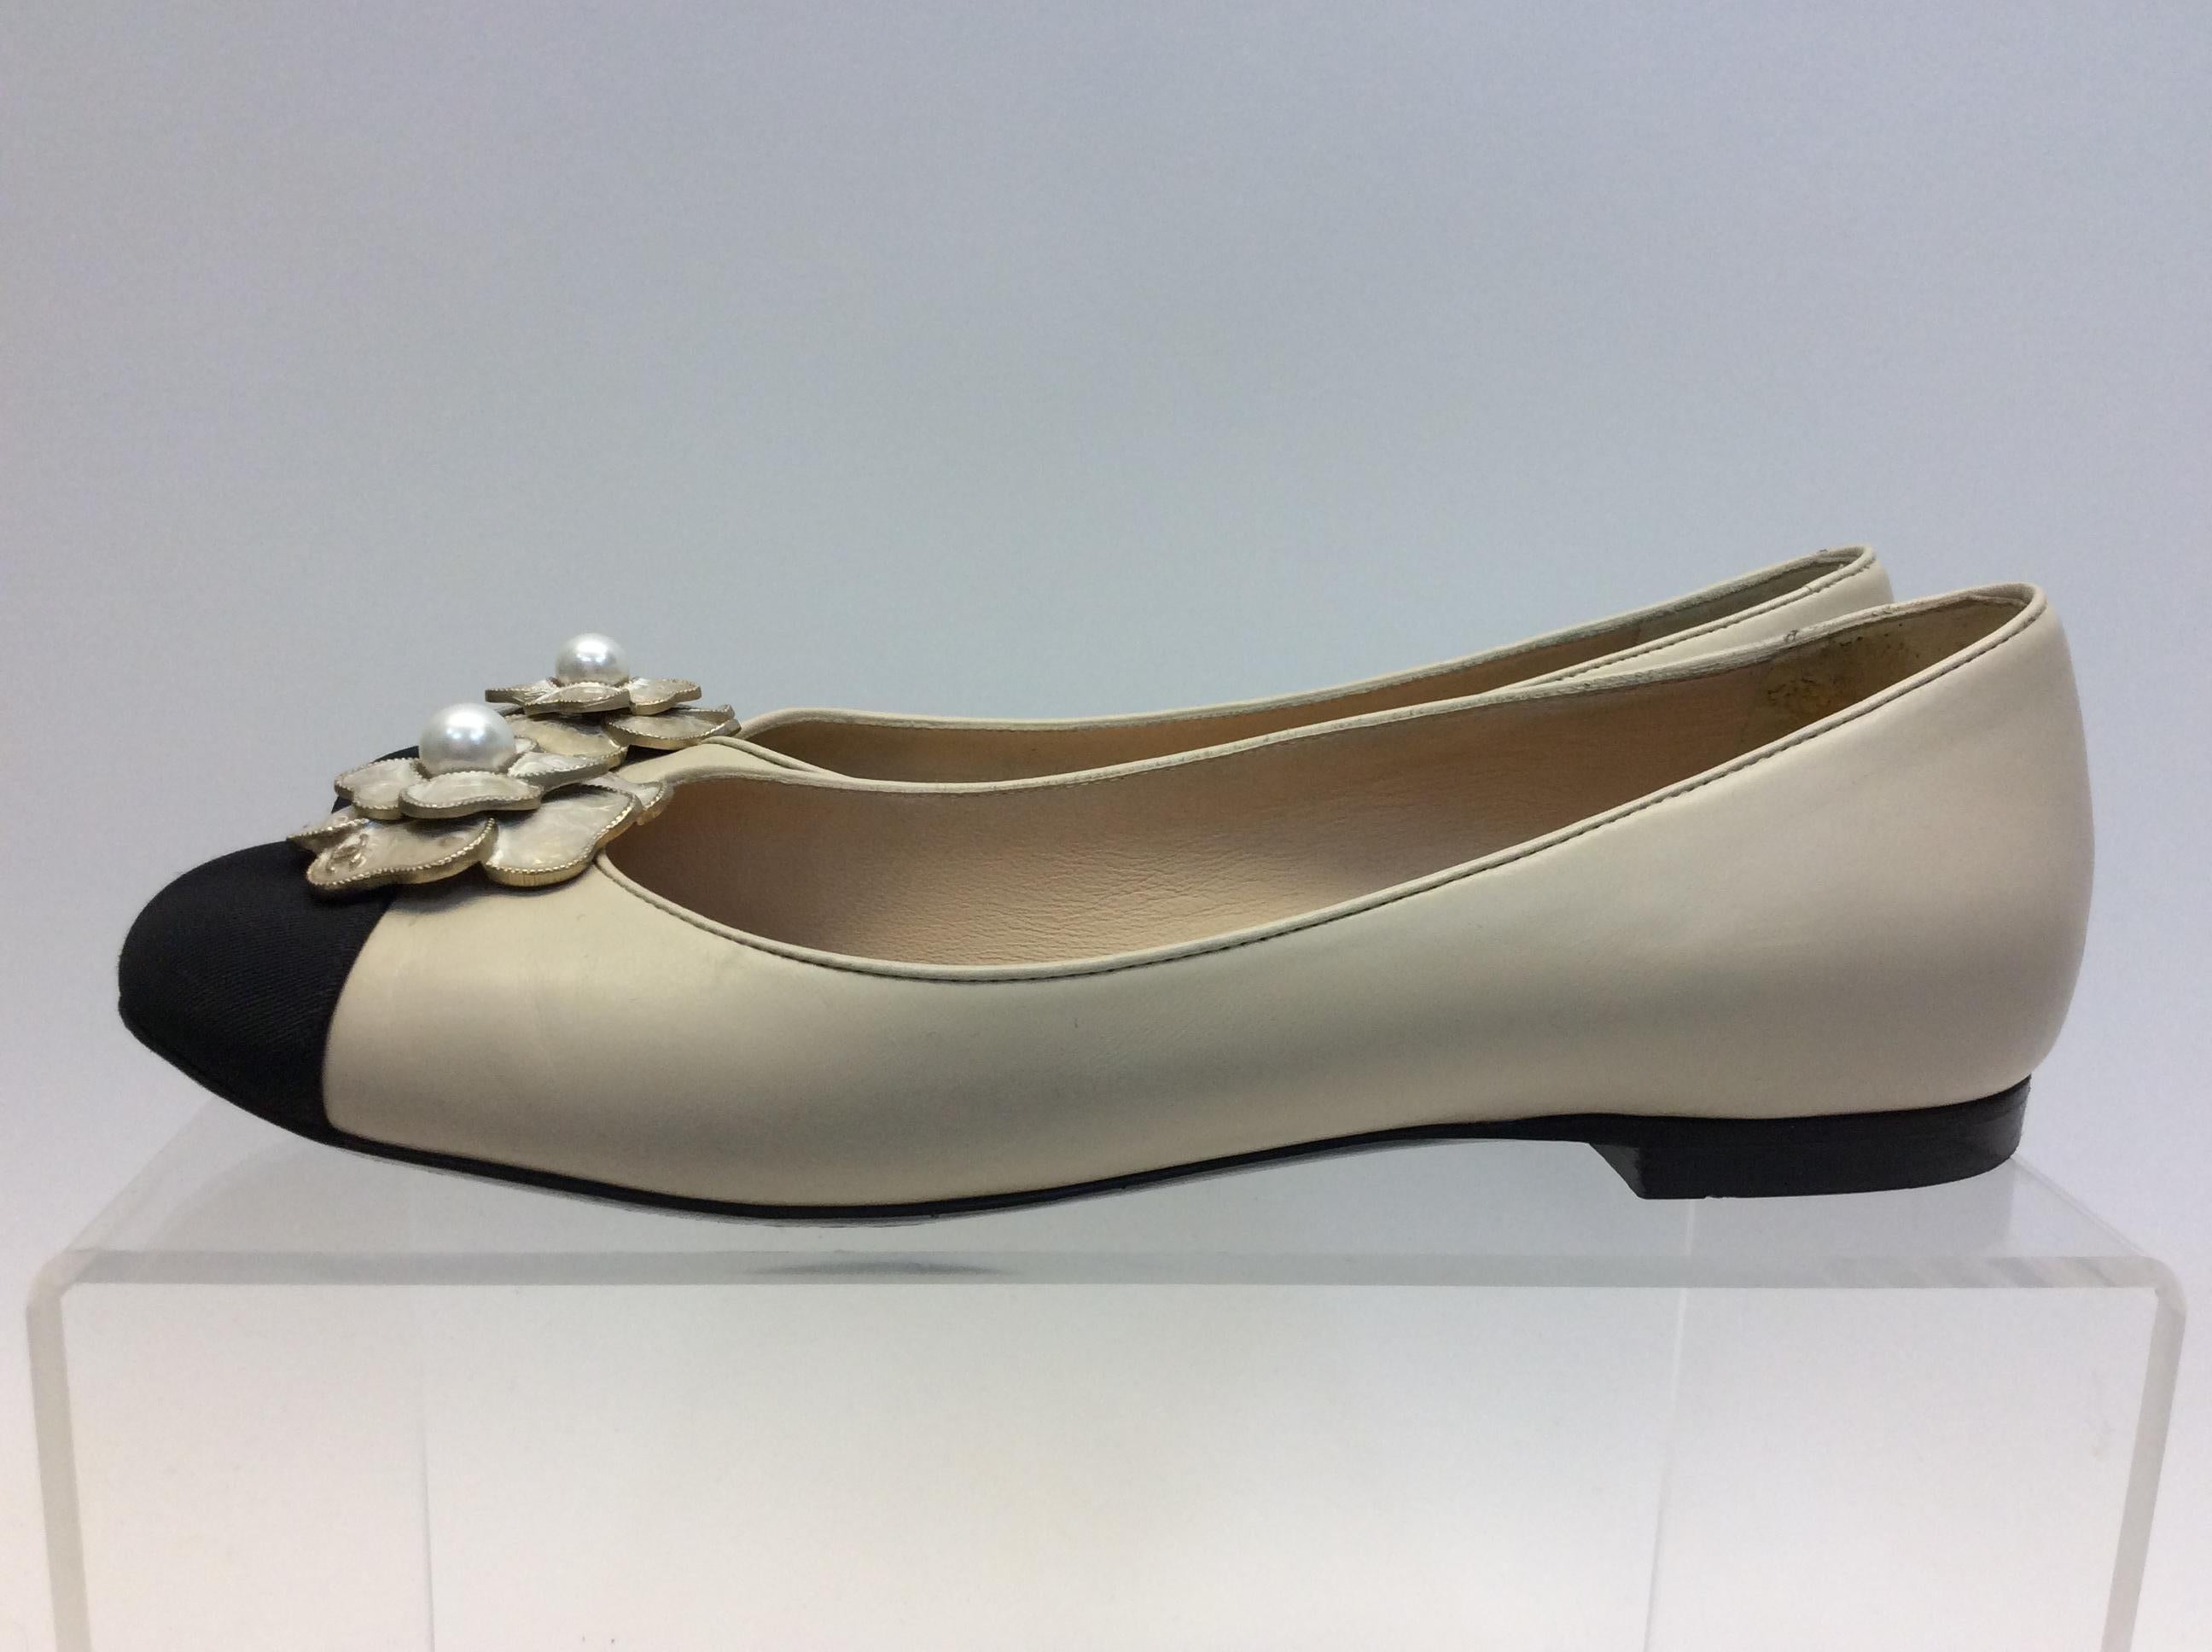 Chanel Tan and Black Flower Ballet Flats
$399
Made in Italy
Leather
Size 39